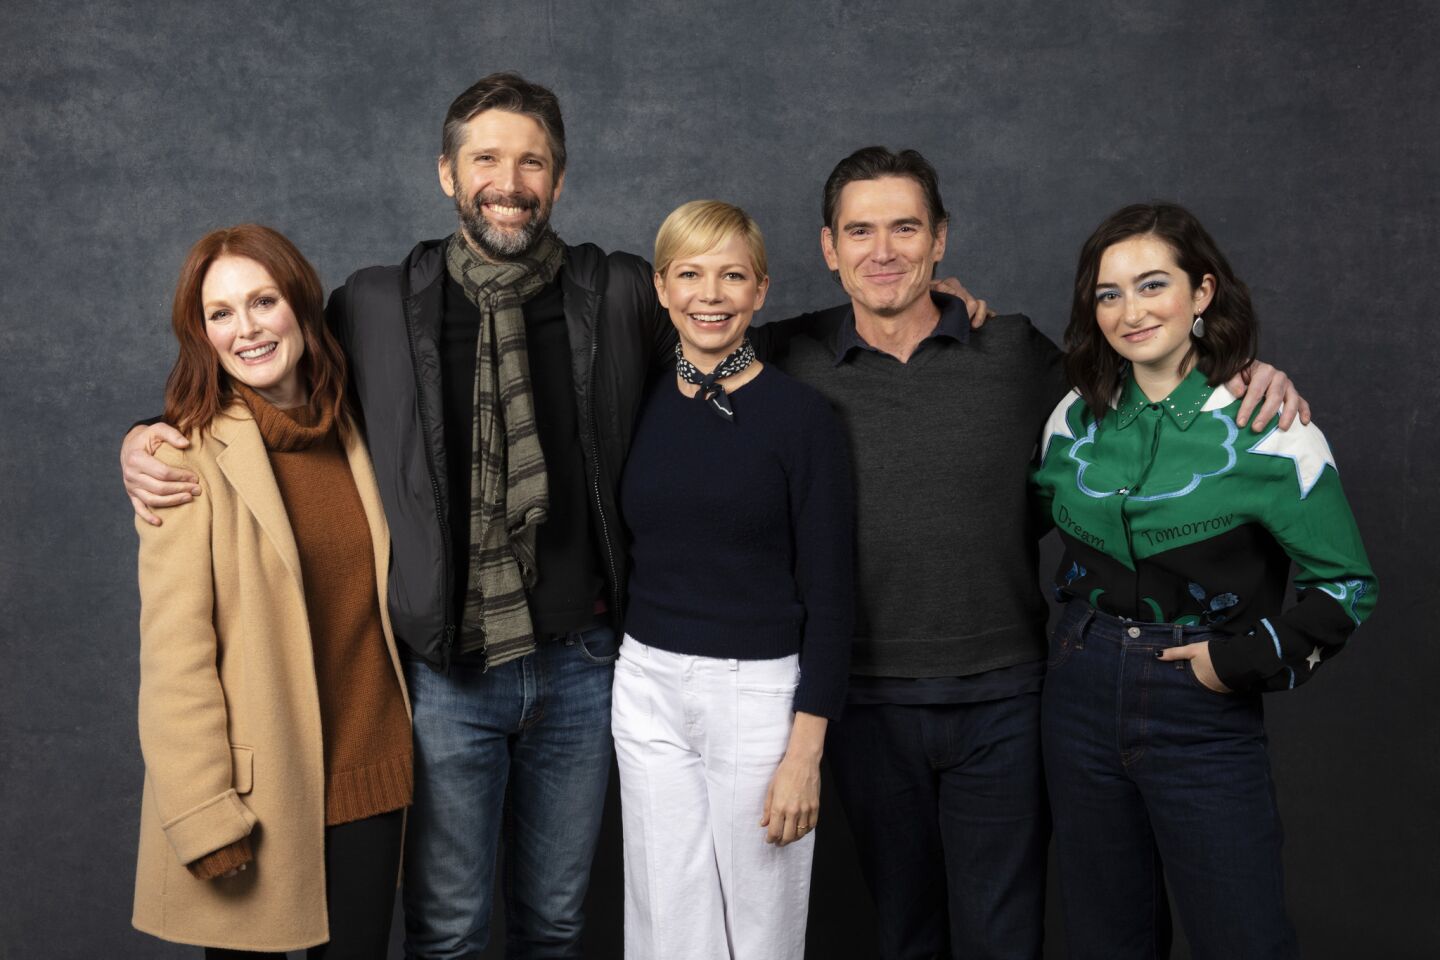 Julianne Moore, director Bart Freundlich, actor Michelle Williams, actor Billy Crudup and actor Abby Quinn from the film "After the Wedding."